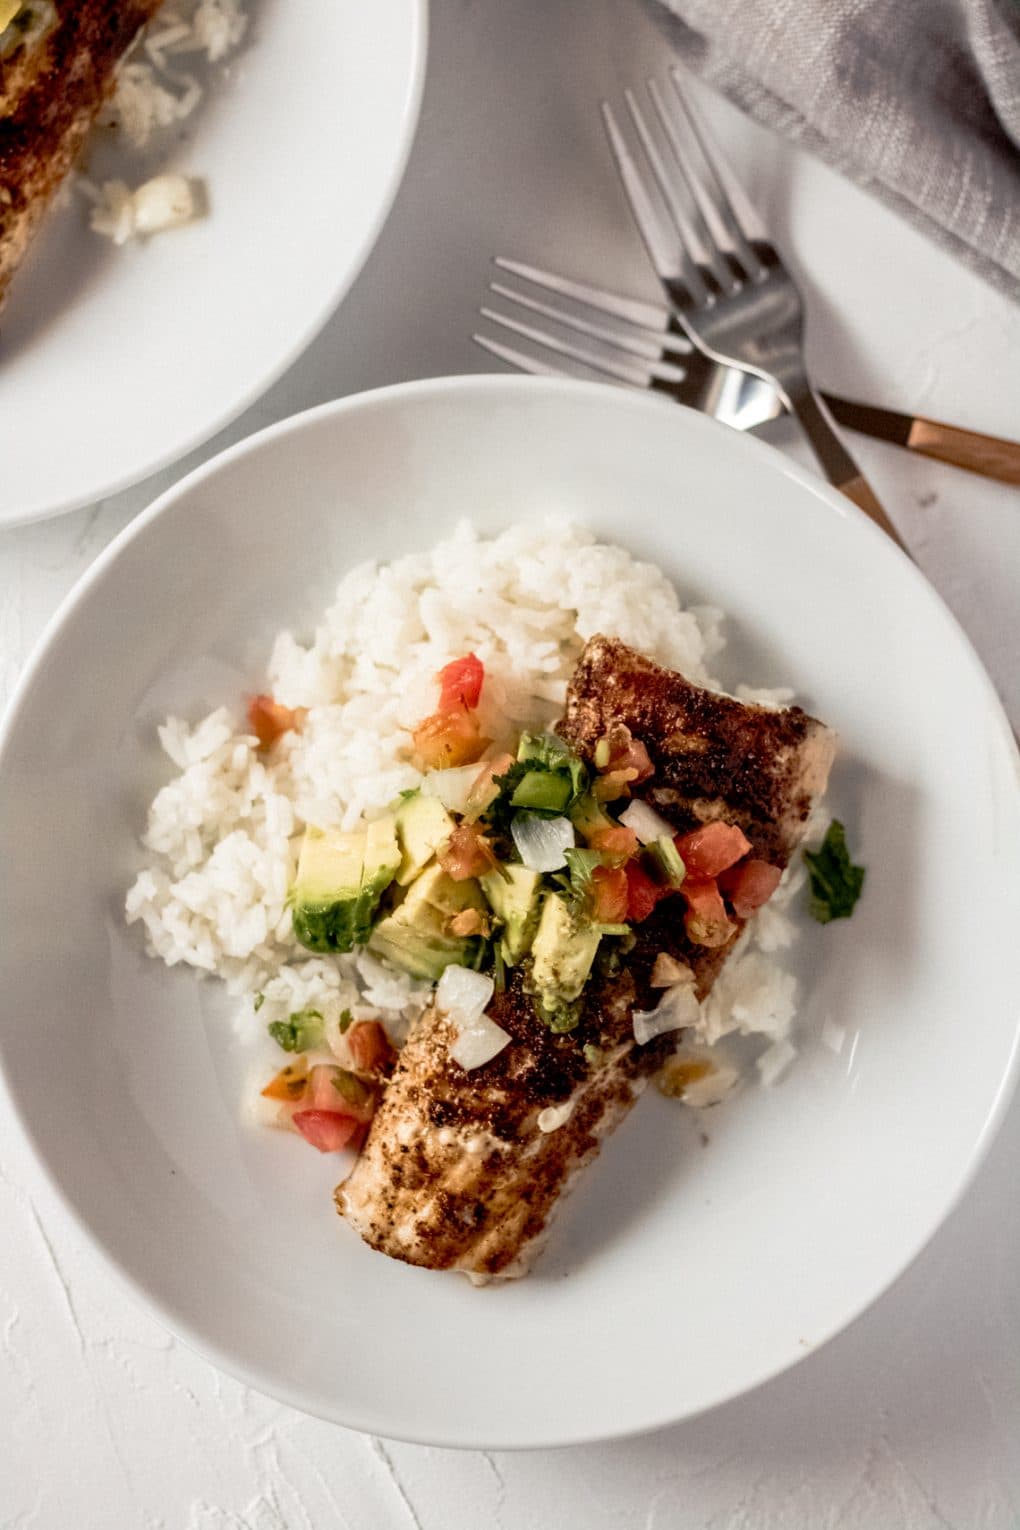 a grilled mahi mahi fillet on a bed of white rice in a white bowl topped with sliced avocado and pico de gallo.